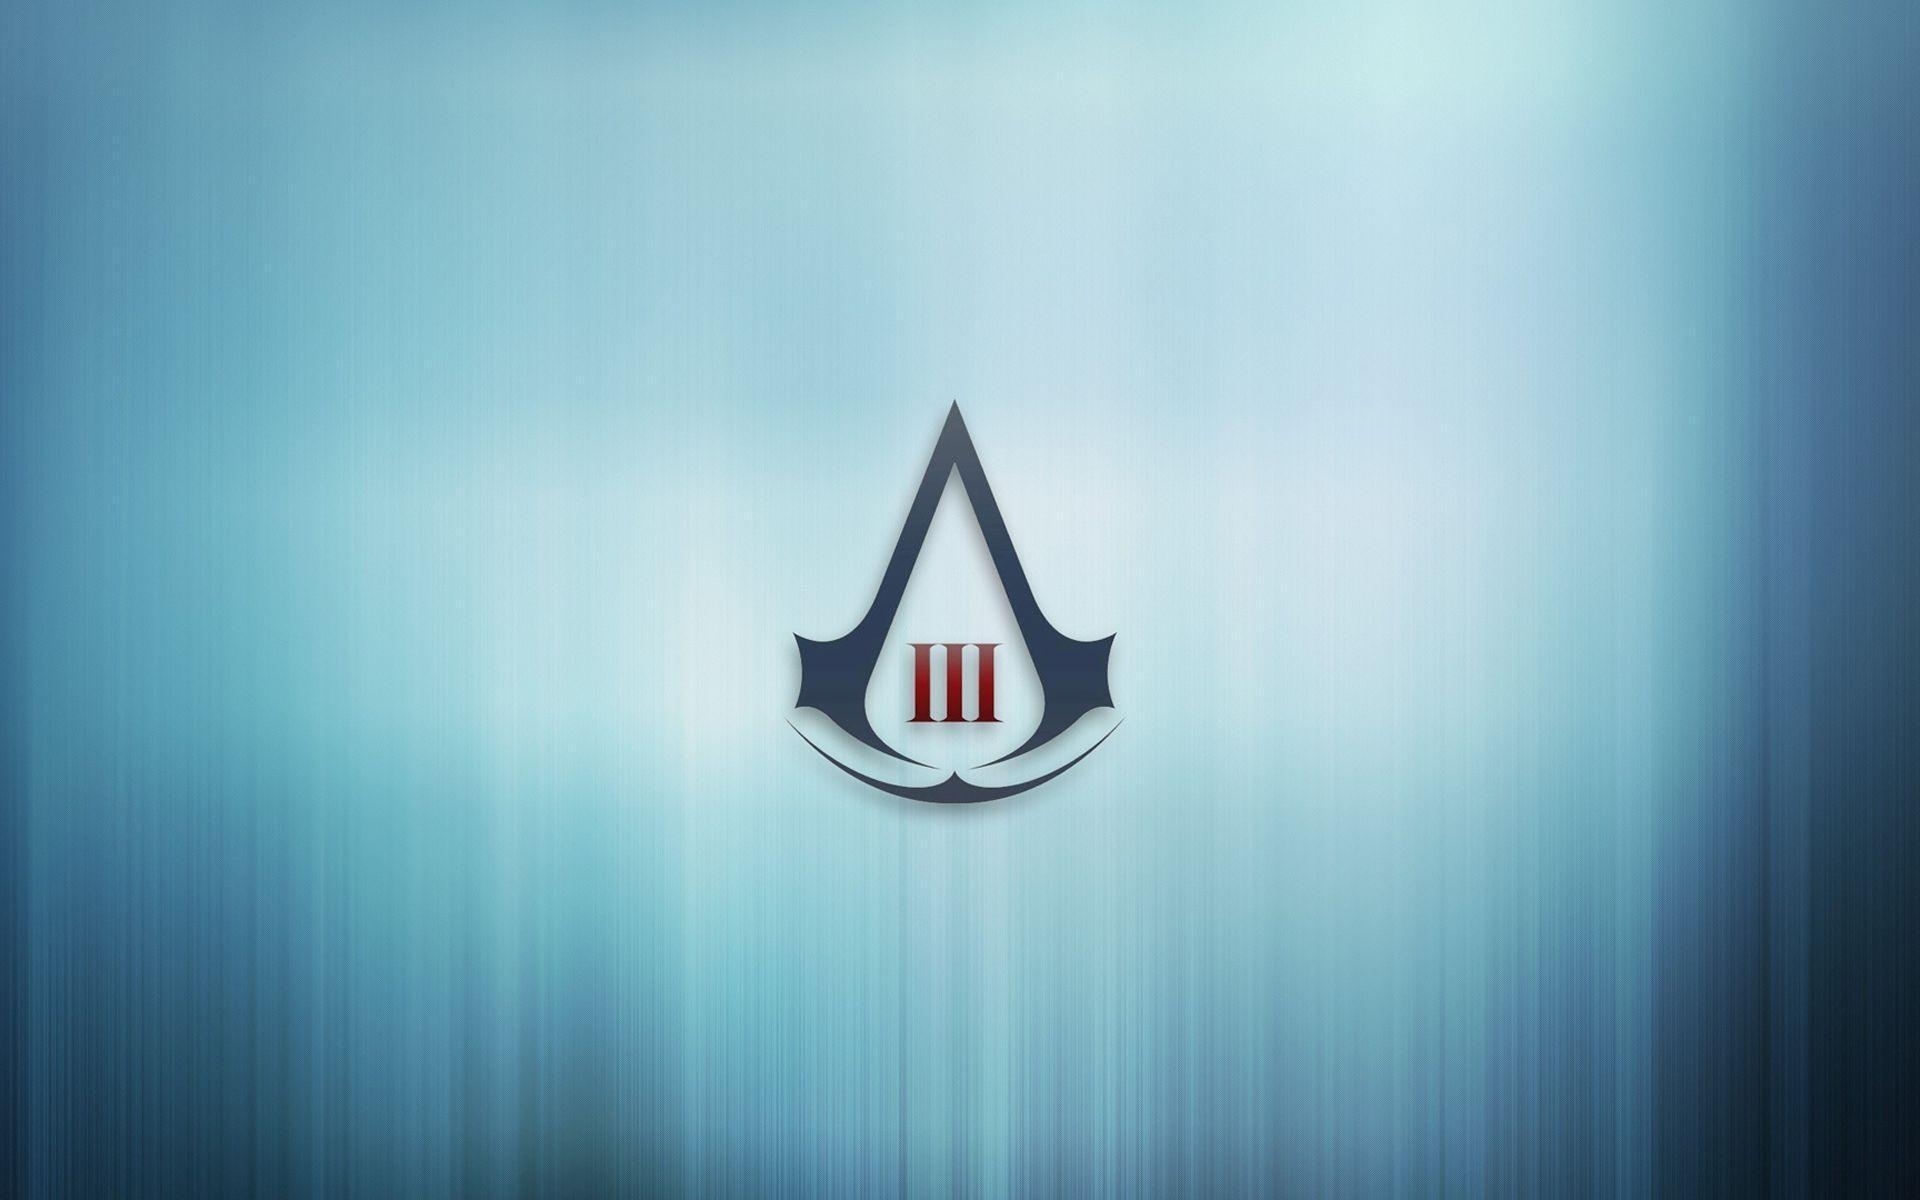 10 Top Assassin's Creed Logo Wallpaper Hd FULL HD 1080p For PC Background